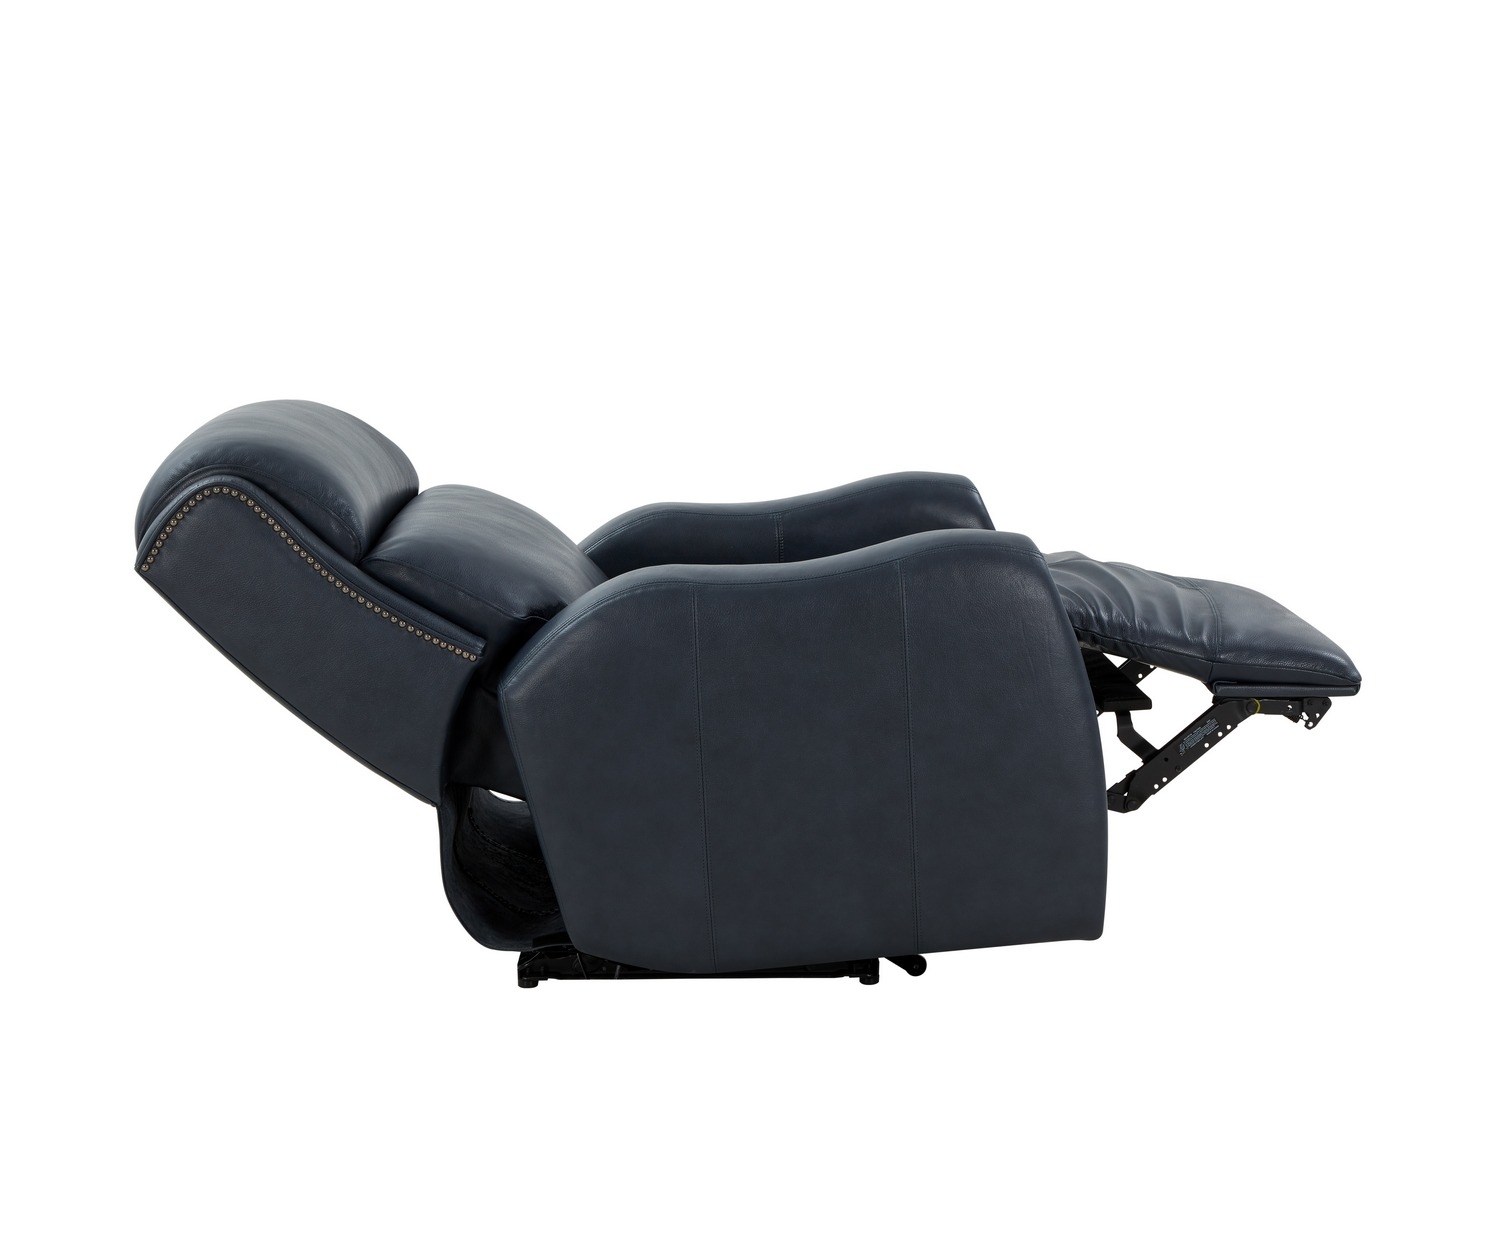 Barcalounger Brookside Power Recliner Chair with Power Head Rest and Power Lumbar - Barone Navy Blue/All Leather